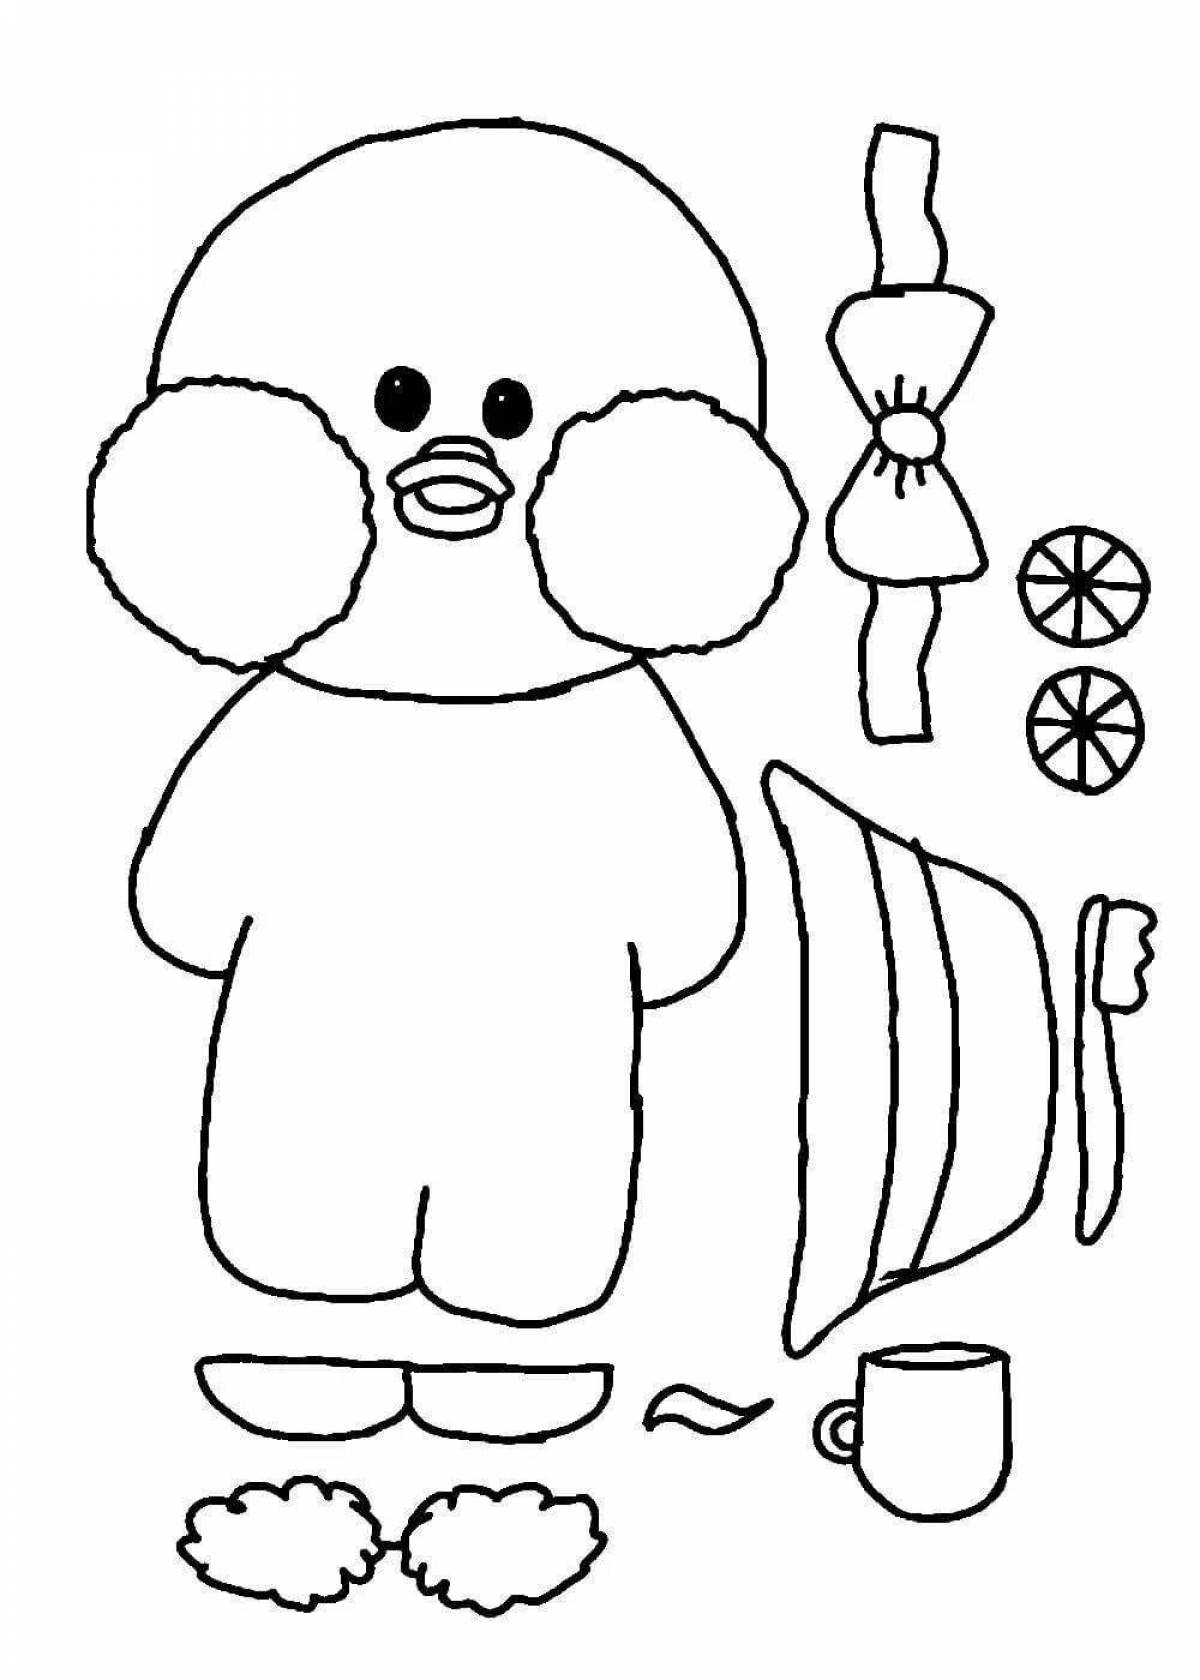 Lalafana's fan colorful coloring page